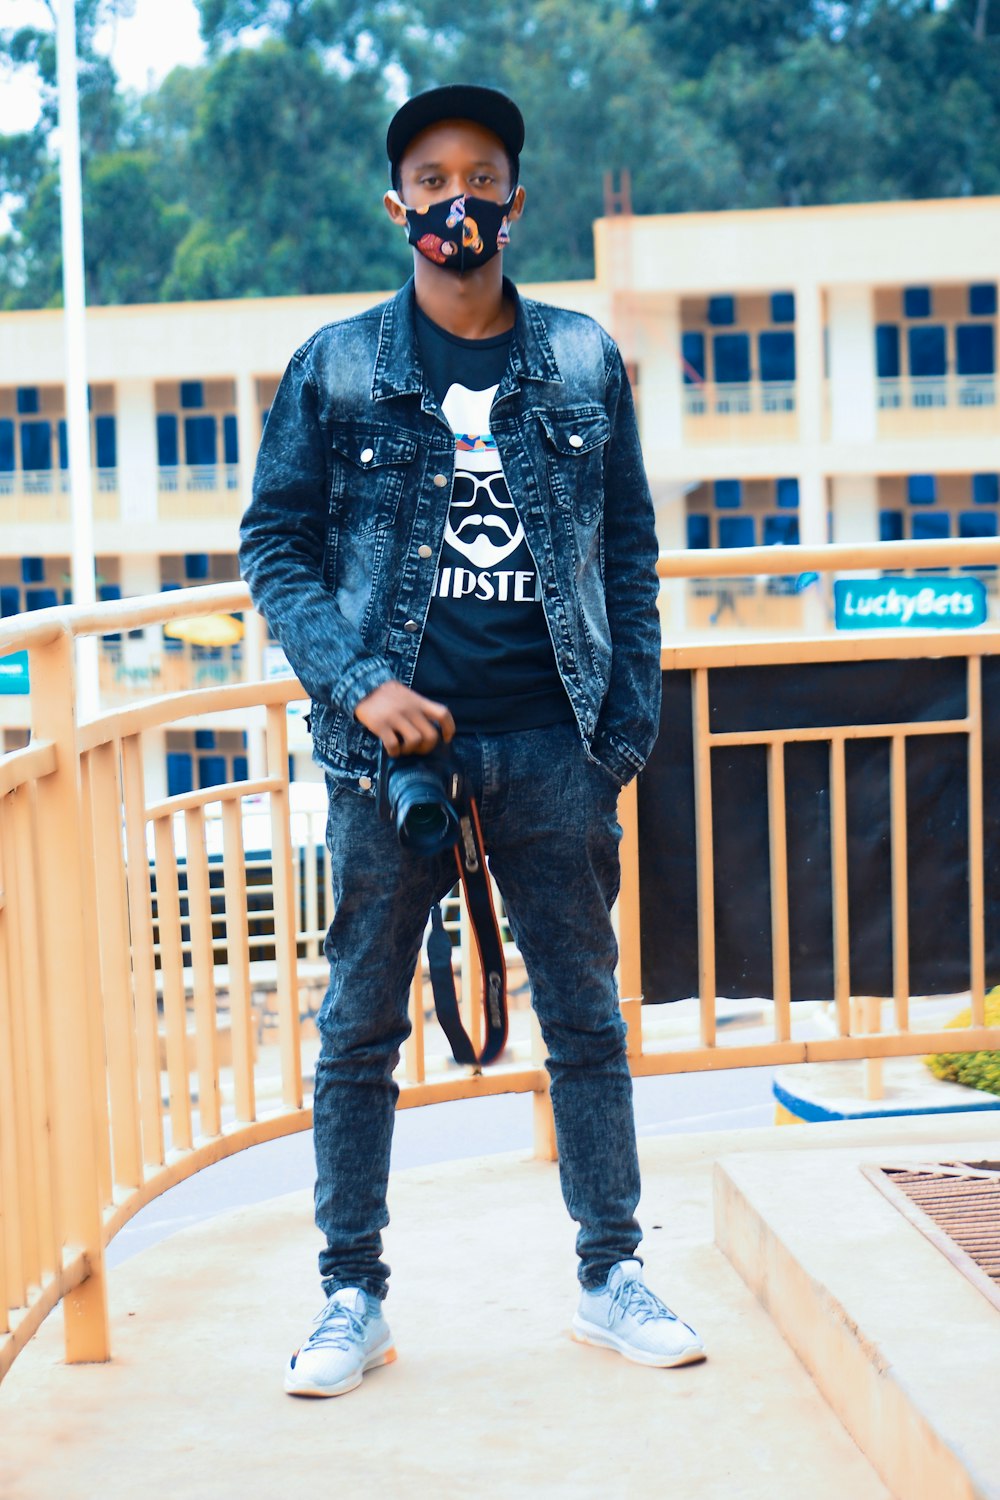 Man in blue denim jacket and black pants standing on white wooden bench  during daytime photo – Free Butare Image on Unsplash